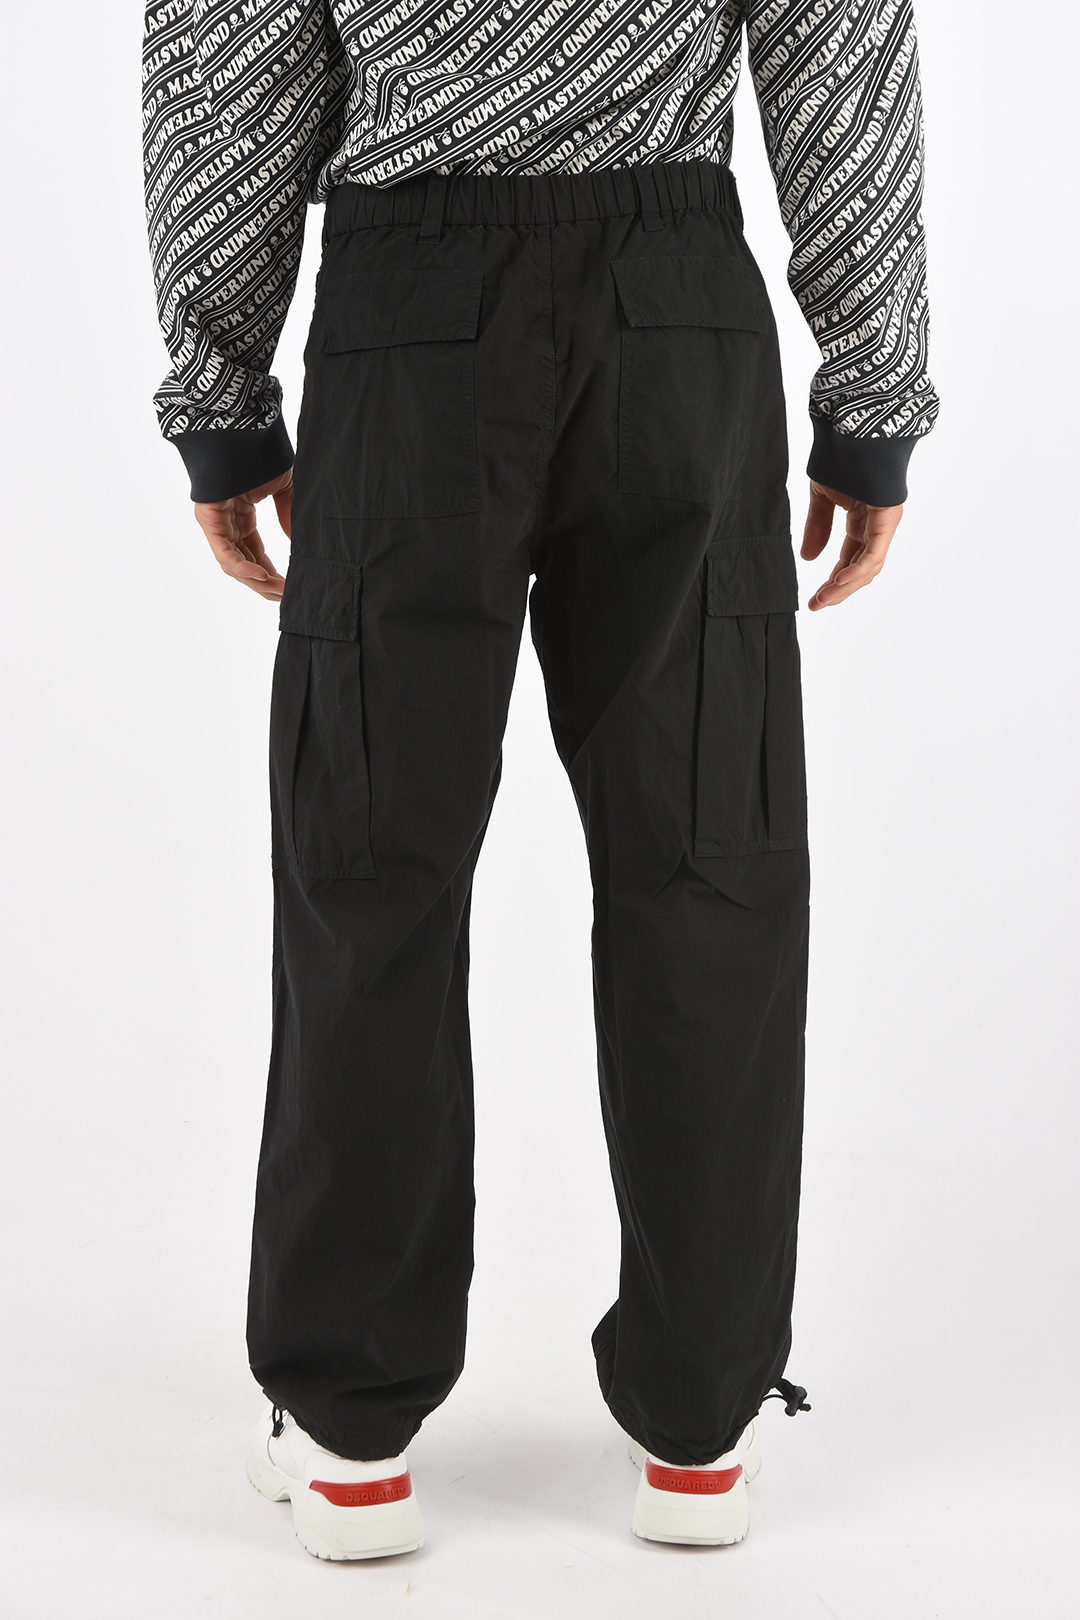 Aspesi Cargo Trousers CARRIER with Drawstrings at Waistband and Ankles ...